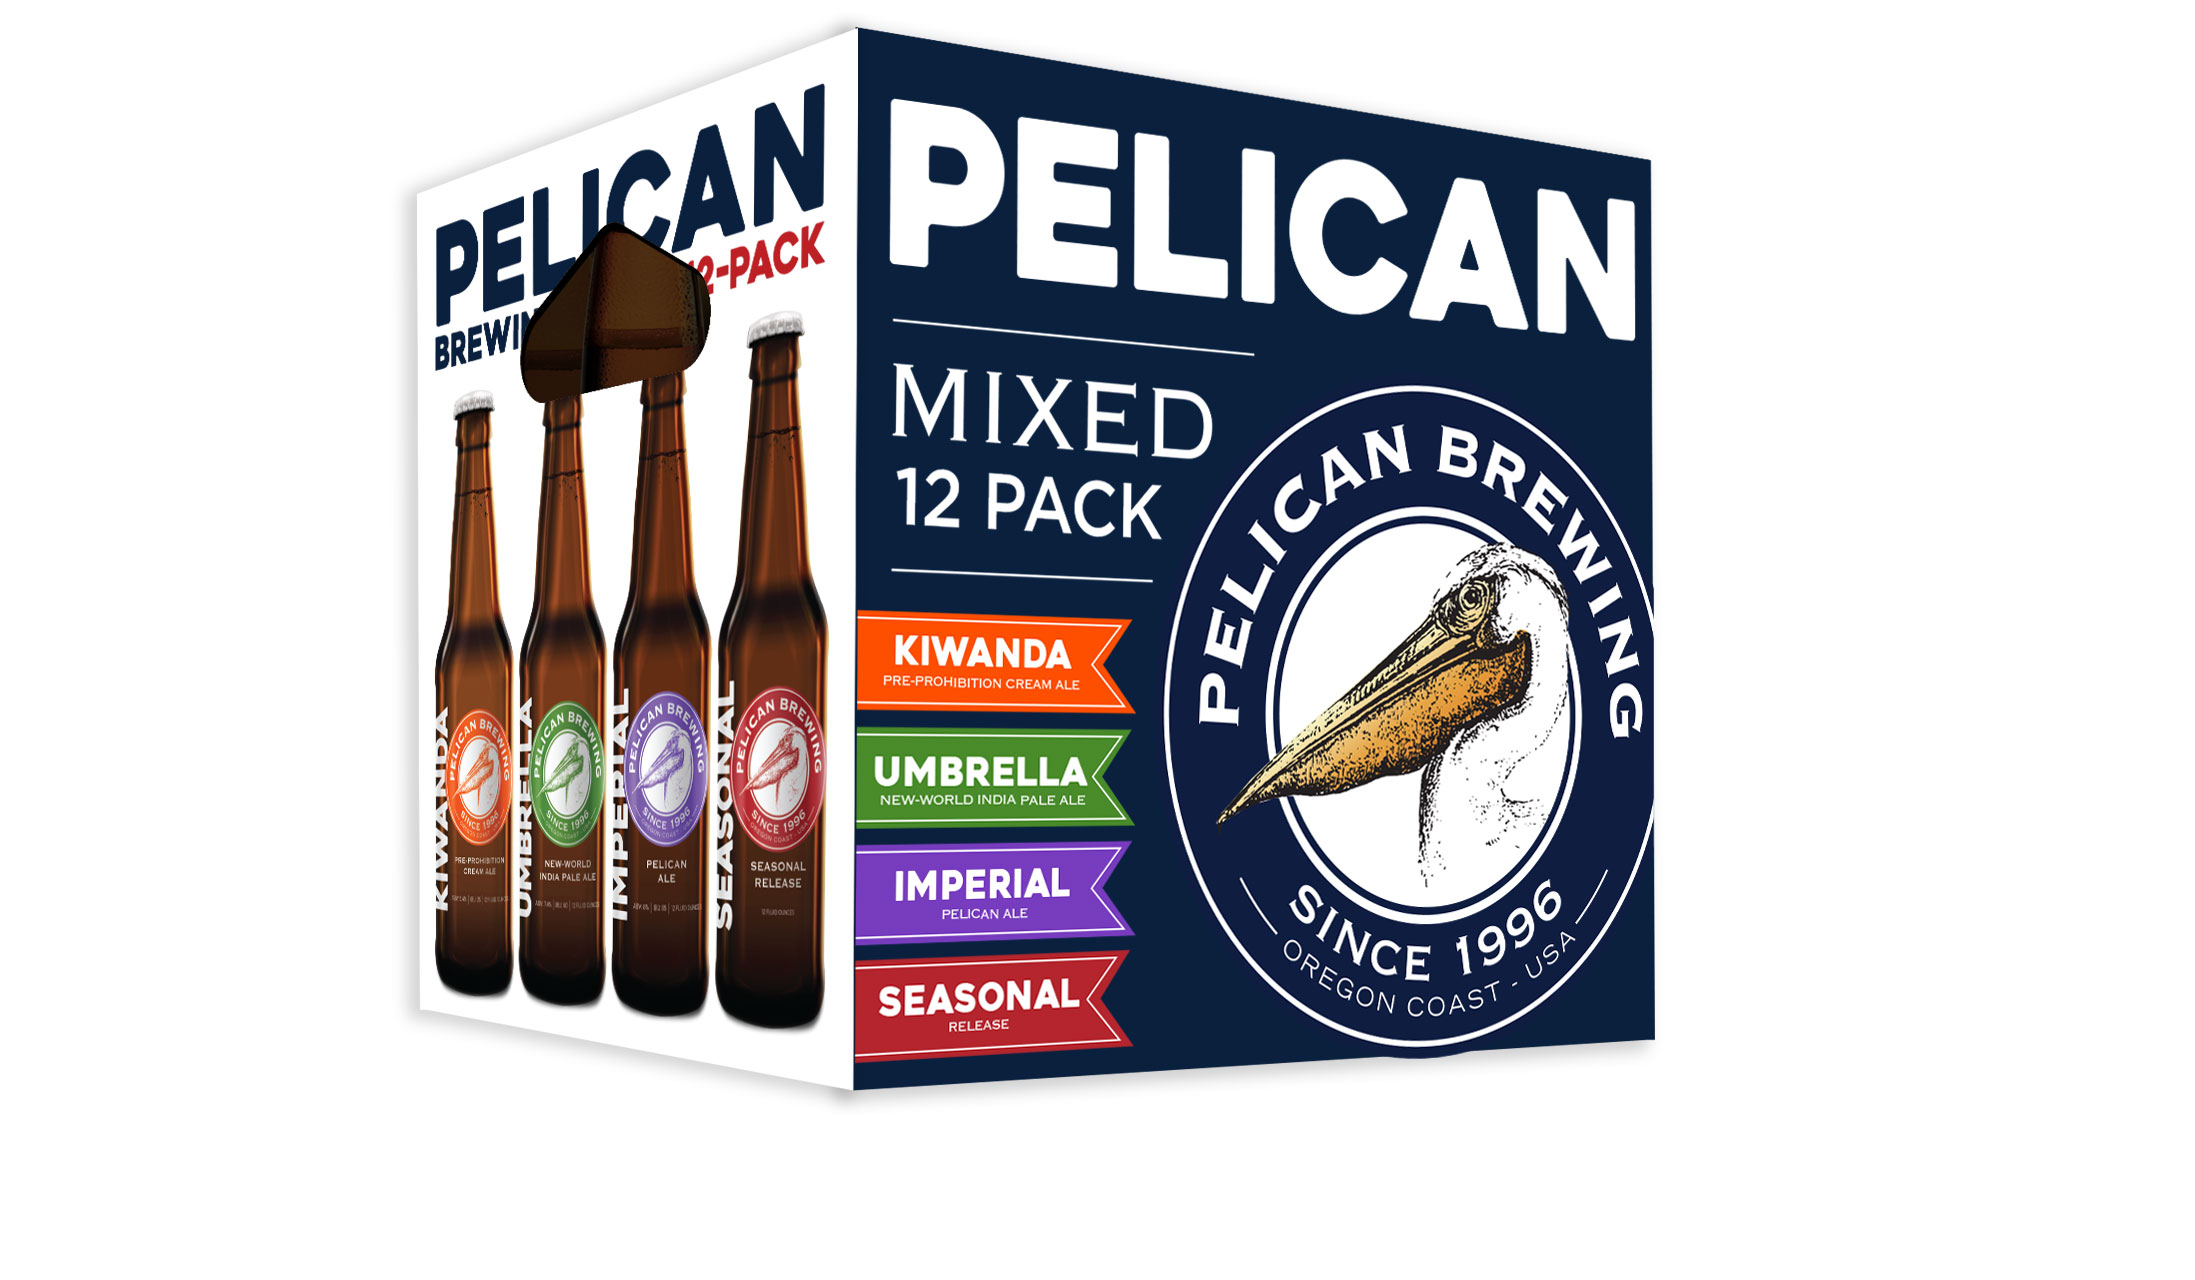 Pelican introduces fresh, new packaging & its first mixed 12-pack of award-winning craft beer.